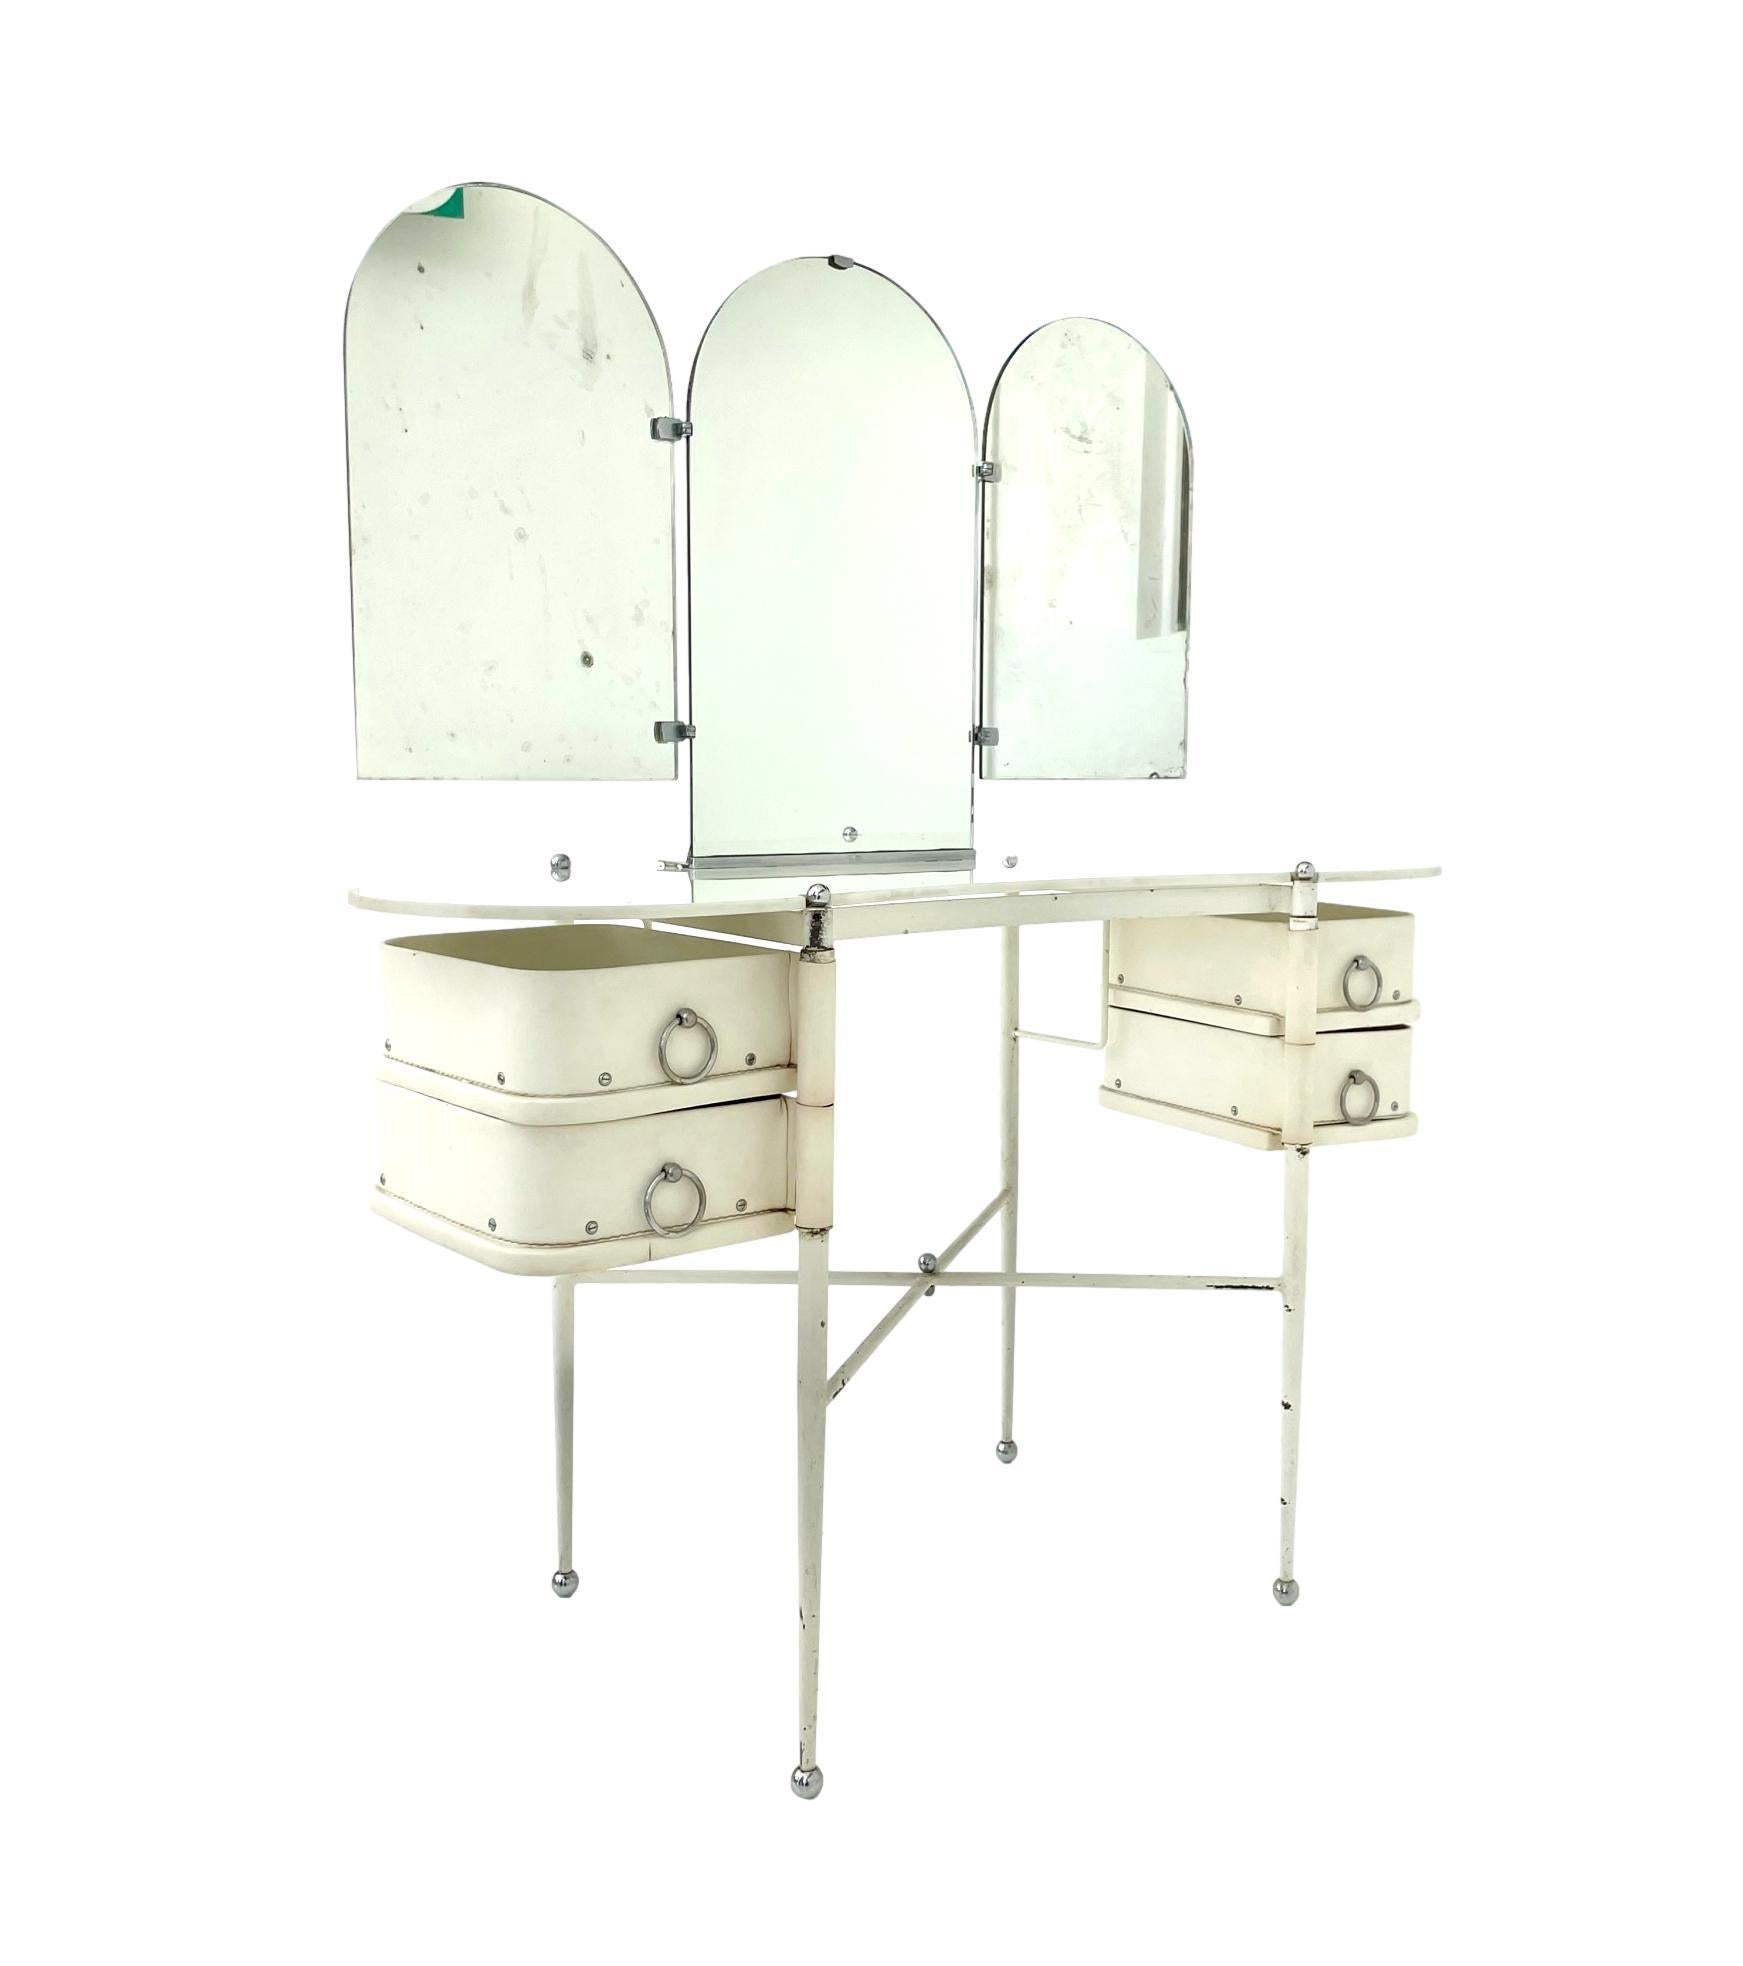 Monumental vanity by French designer Jacques Adnet. Metal frame with chrome ball feet. 2 drawers flank each side and swivel 180 degrees. Opaque glass kidney top. Triptych mirror with antique glass. Both side mirrors rotate in and out 90 degrees.